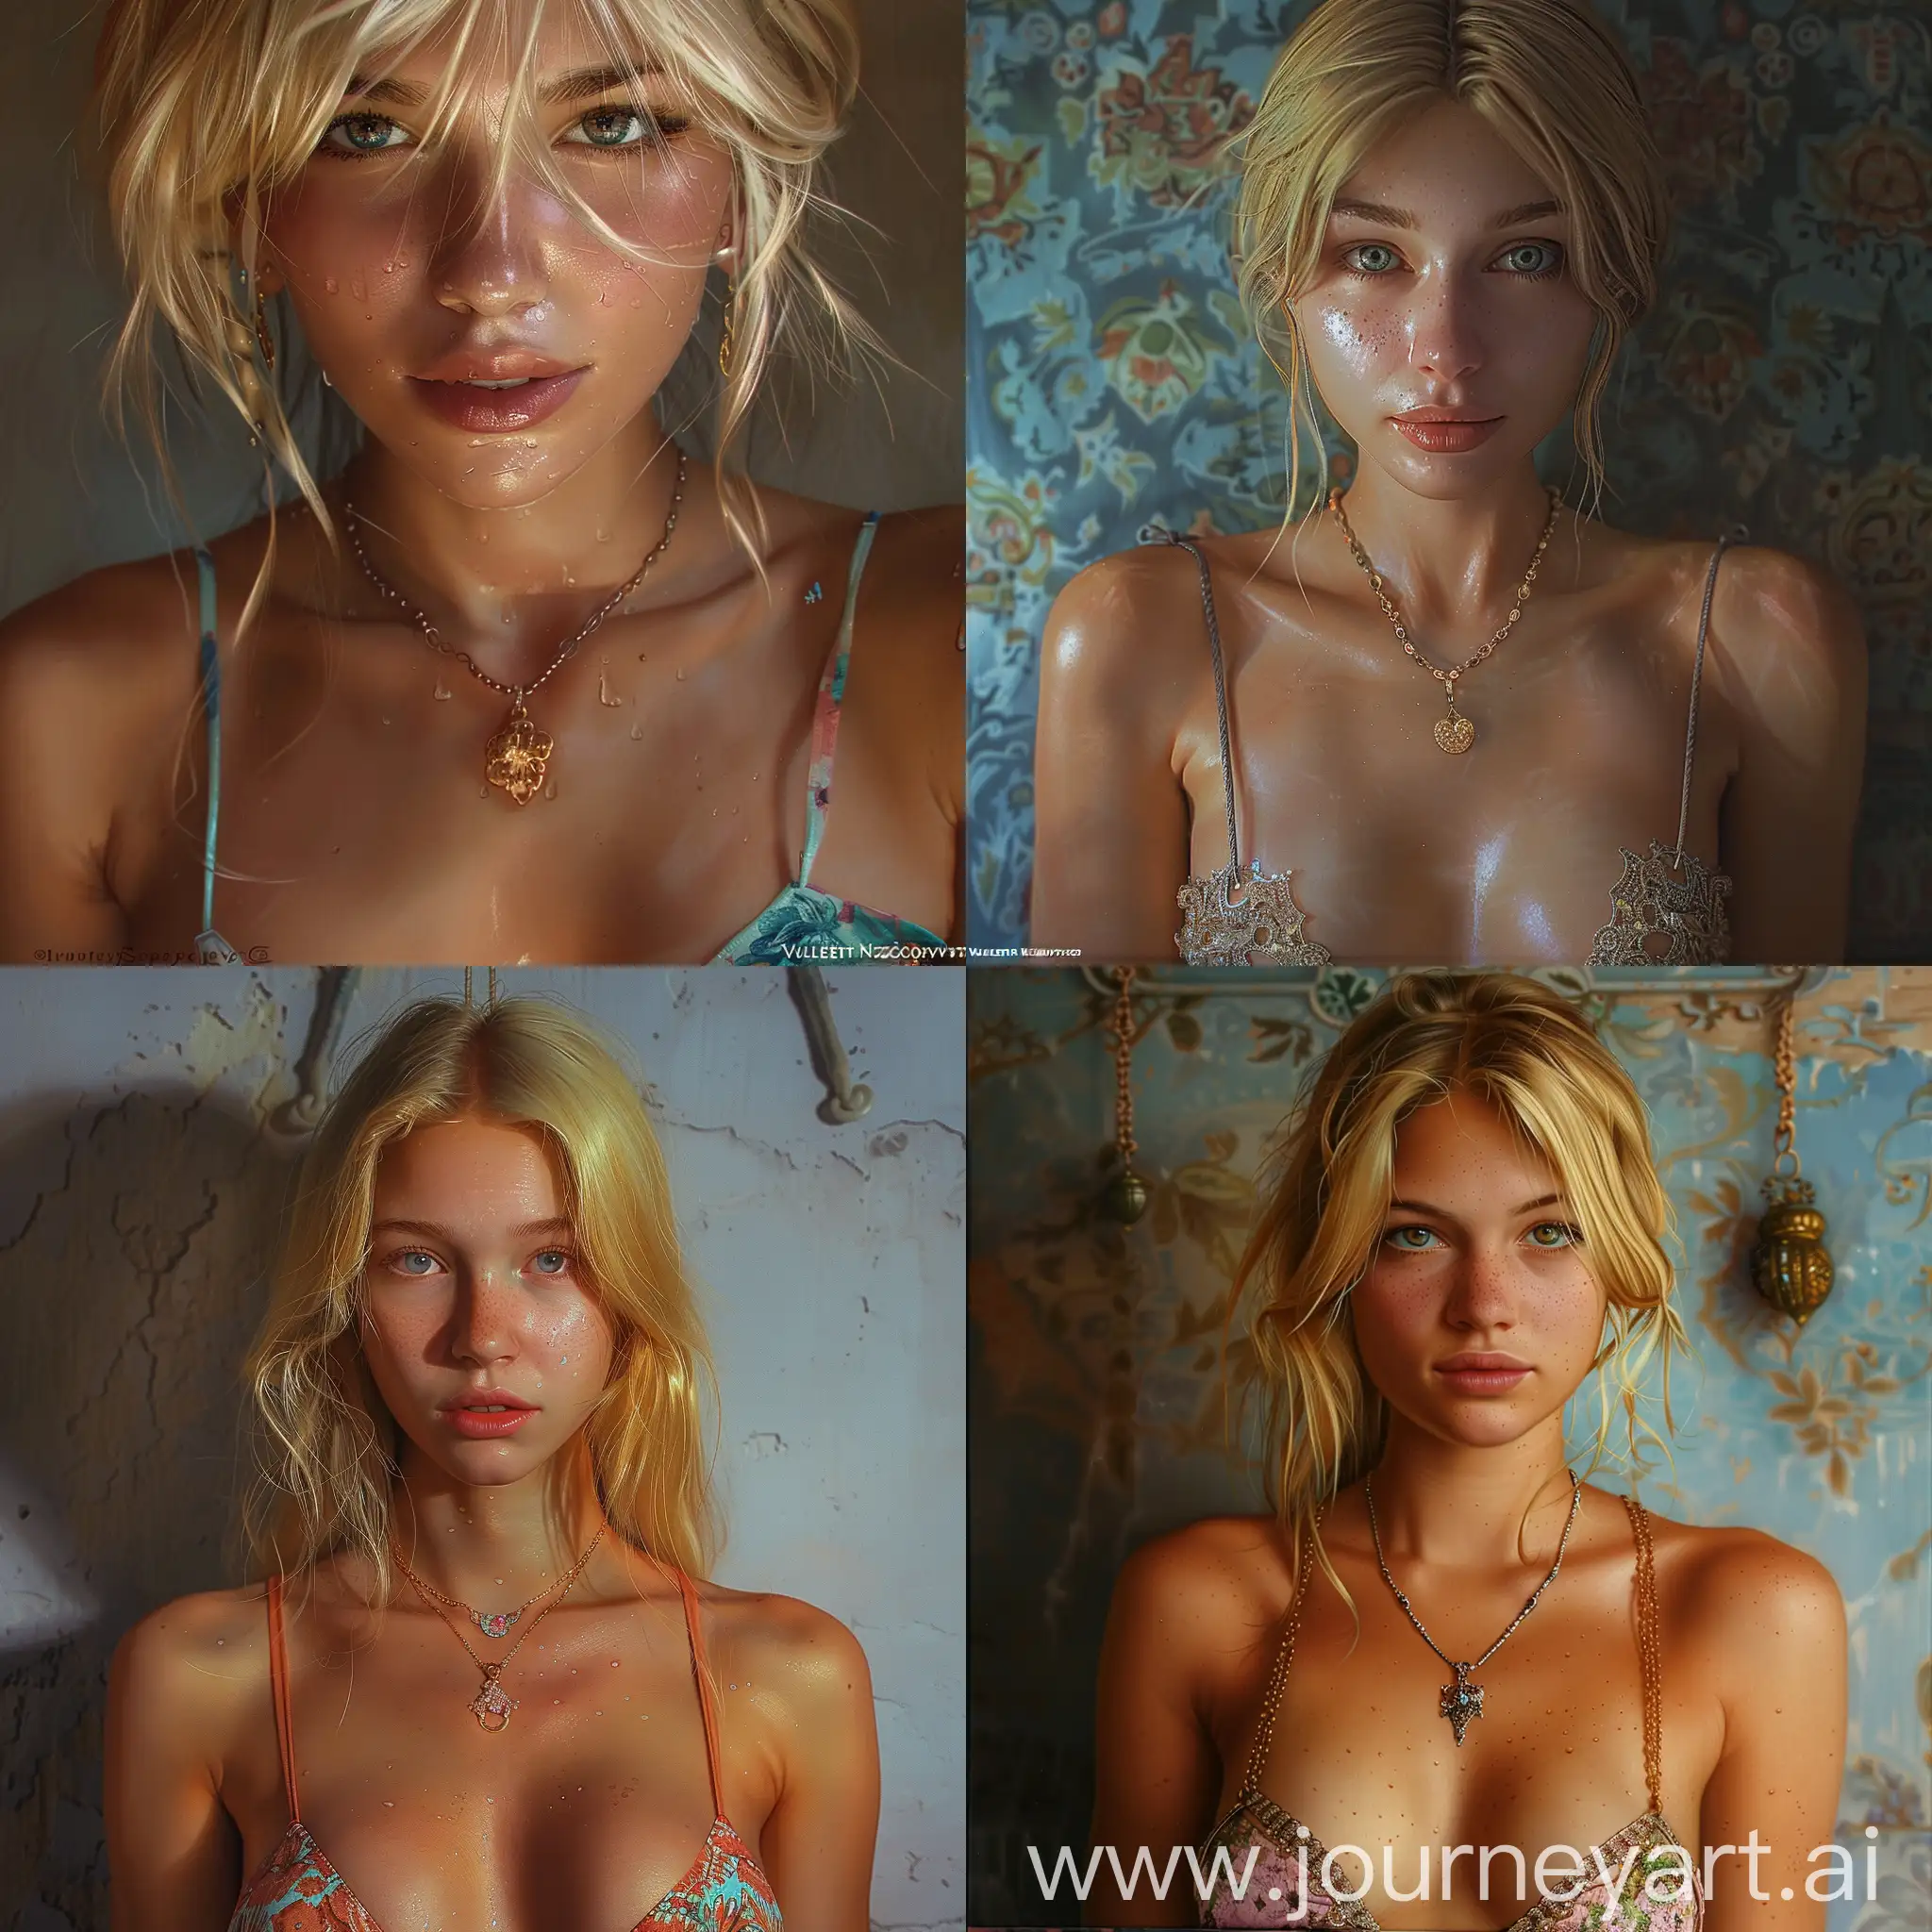  a Young blonde woman, (Bruletova), wearing a bikini top and a necklace, a photorealistic painting by Victor Nizovtsev, trending on cg society, neo-romanticism, enchanting, detailed, anime aesthetic, photoshoot